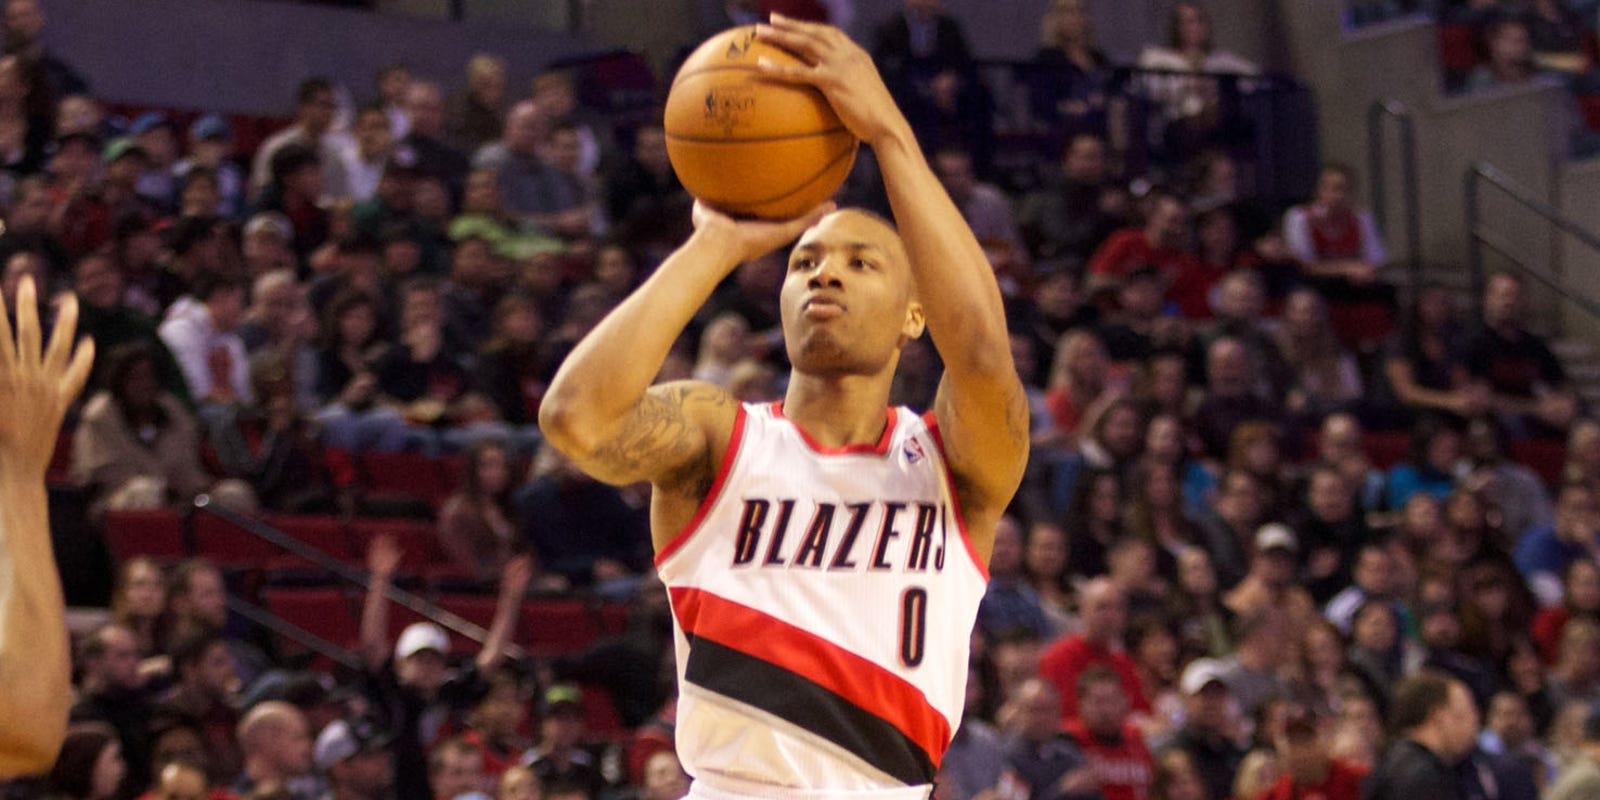 Blazers top reeling T'wolves to stay in playoff hunt